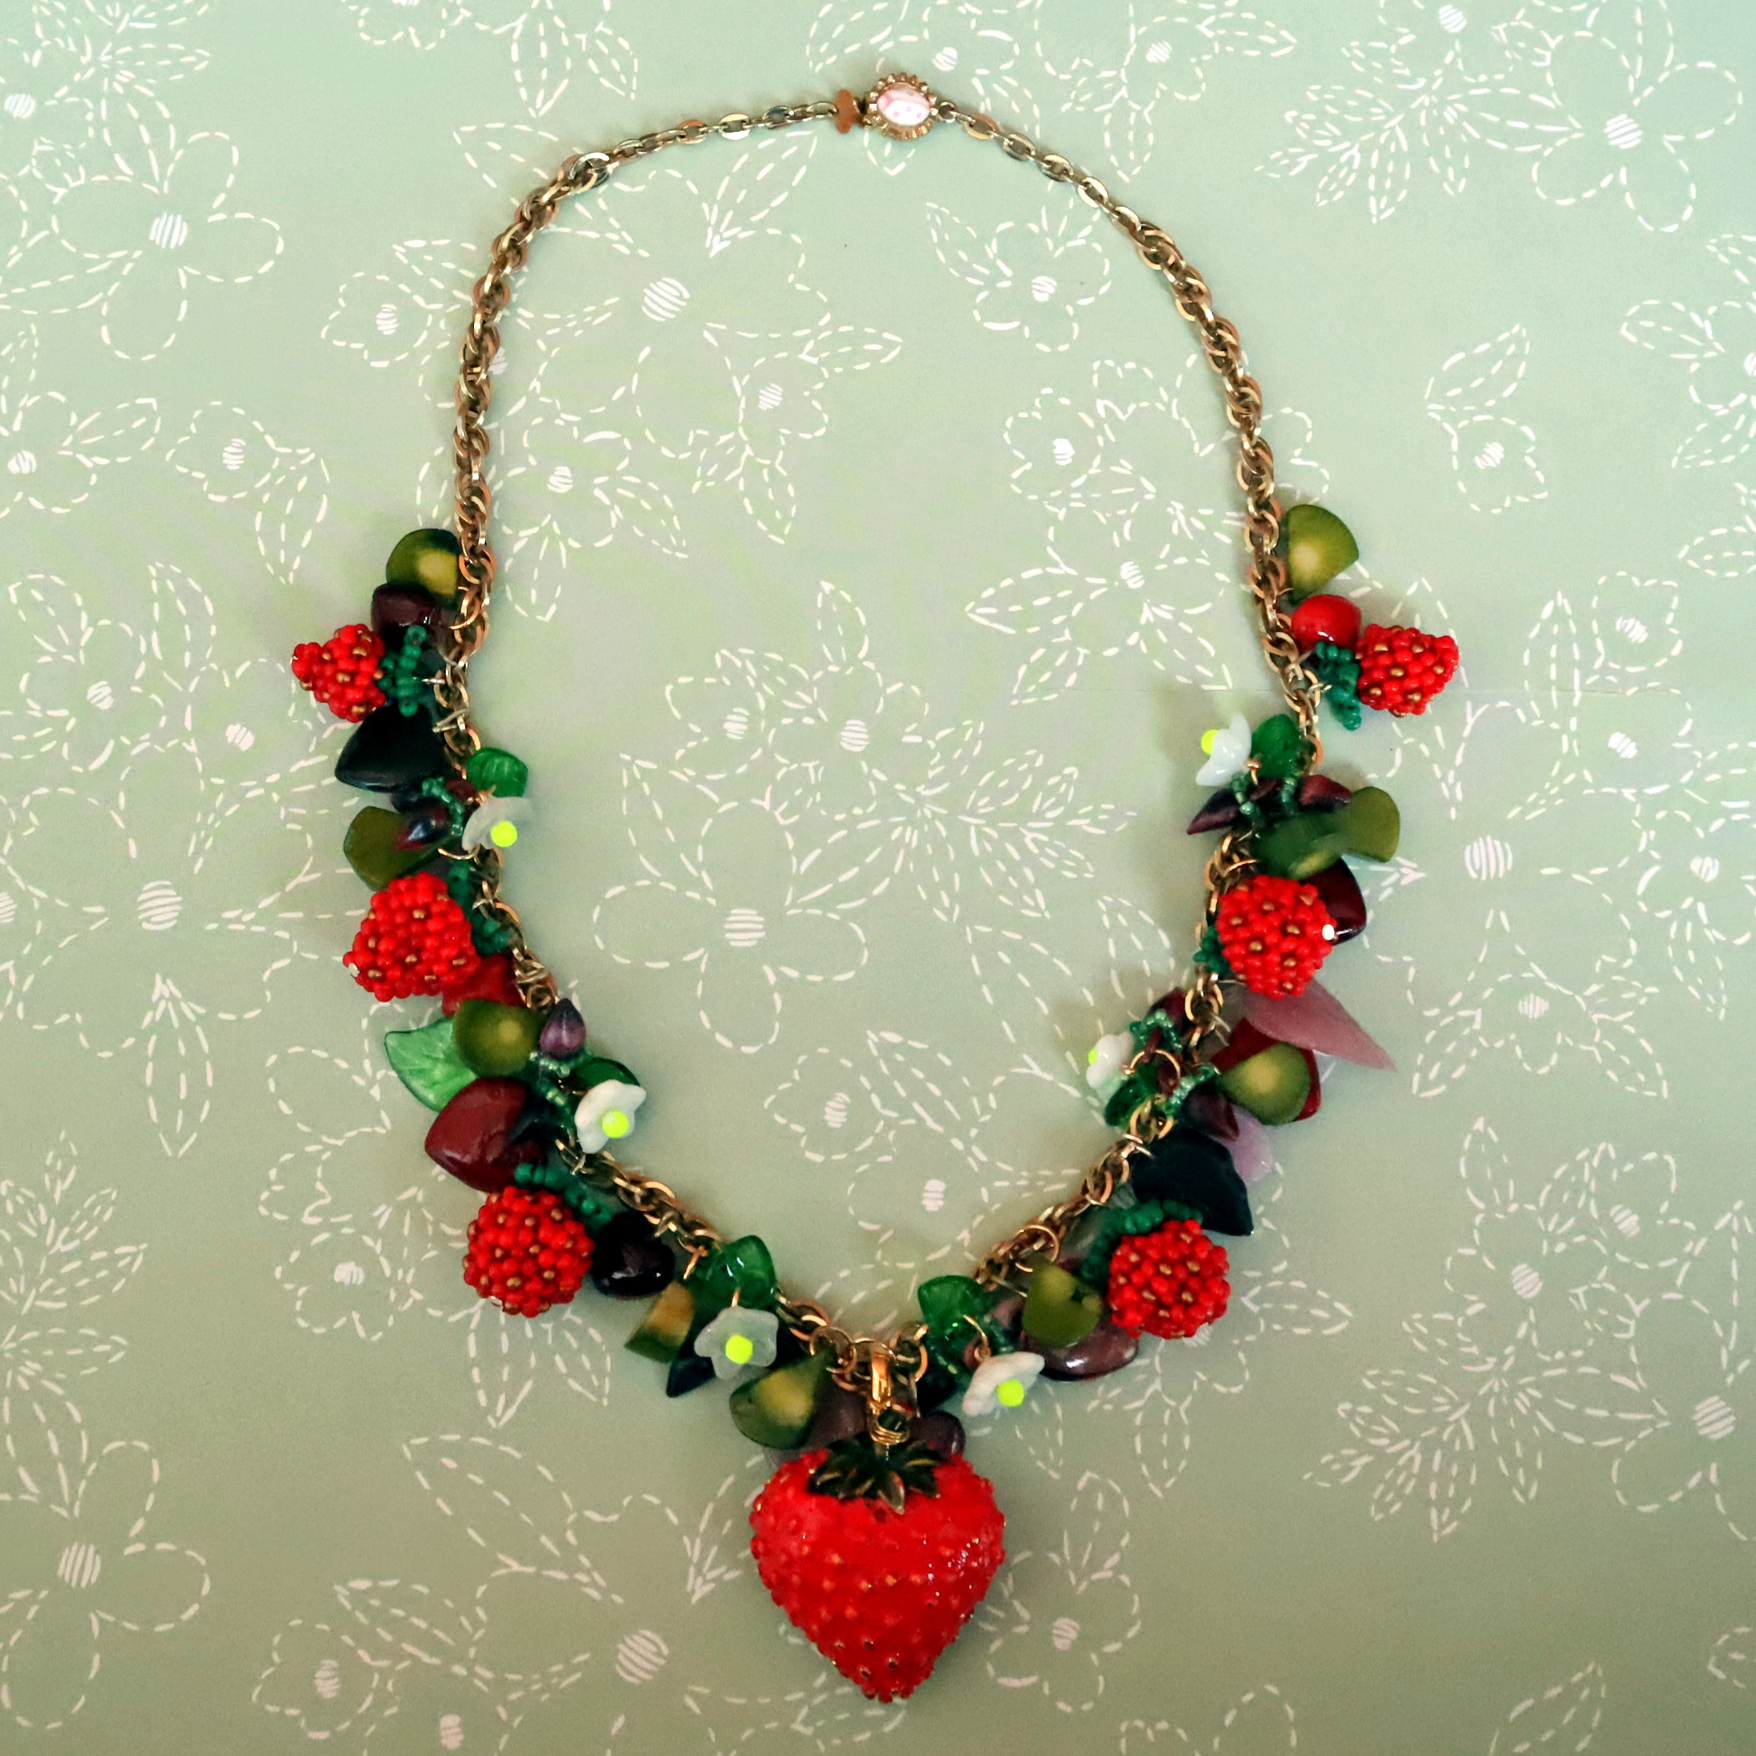 Strawberry leaves Beads Polymer clay. Green leaf beads. - Inspire